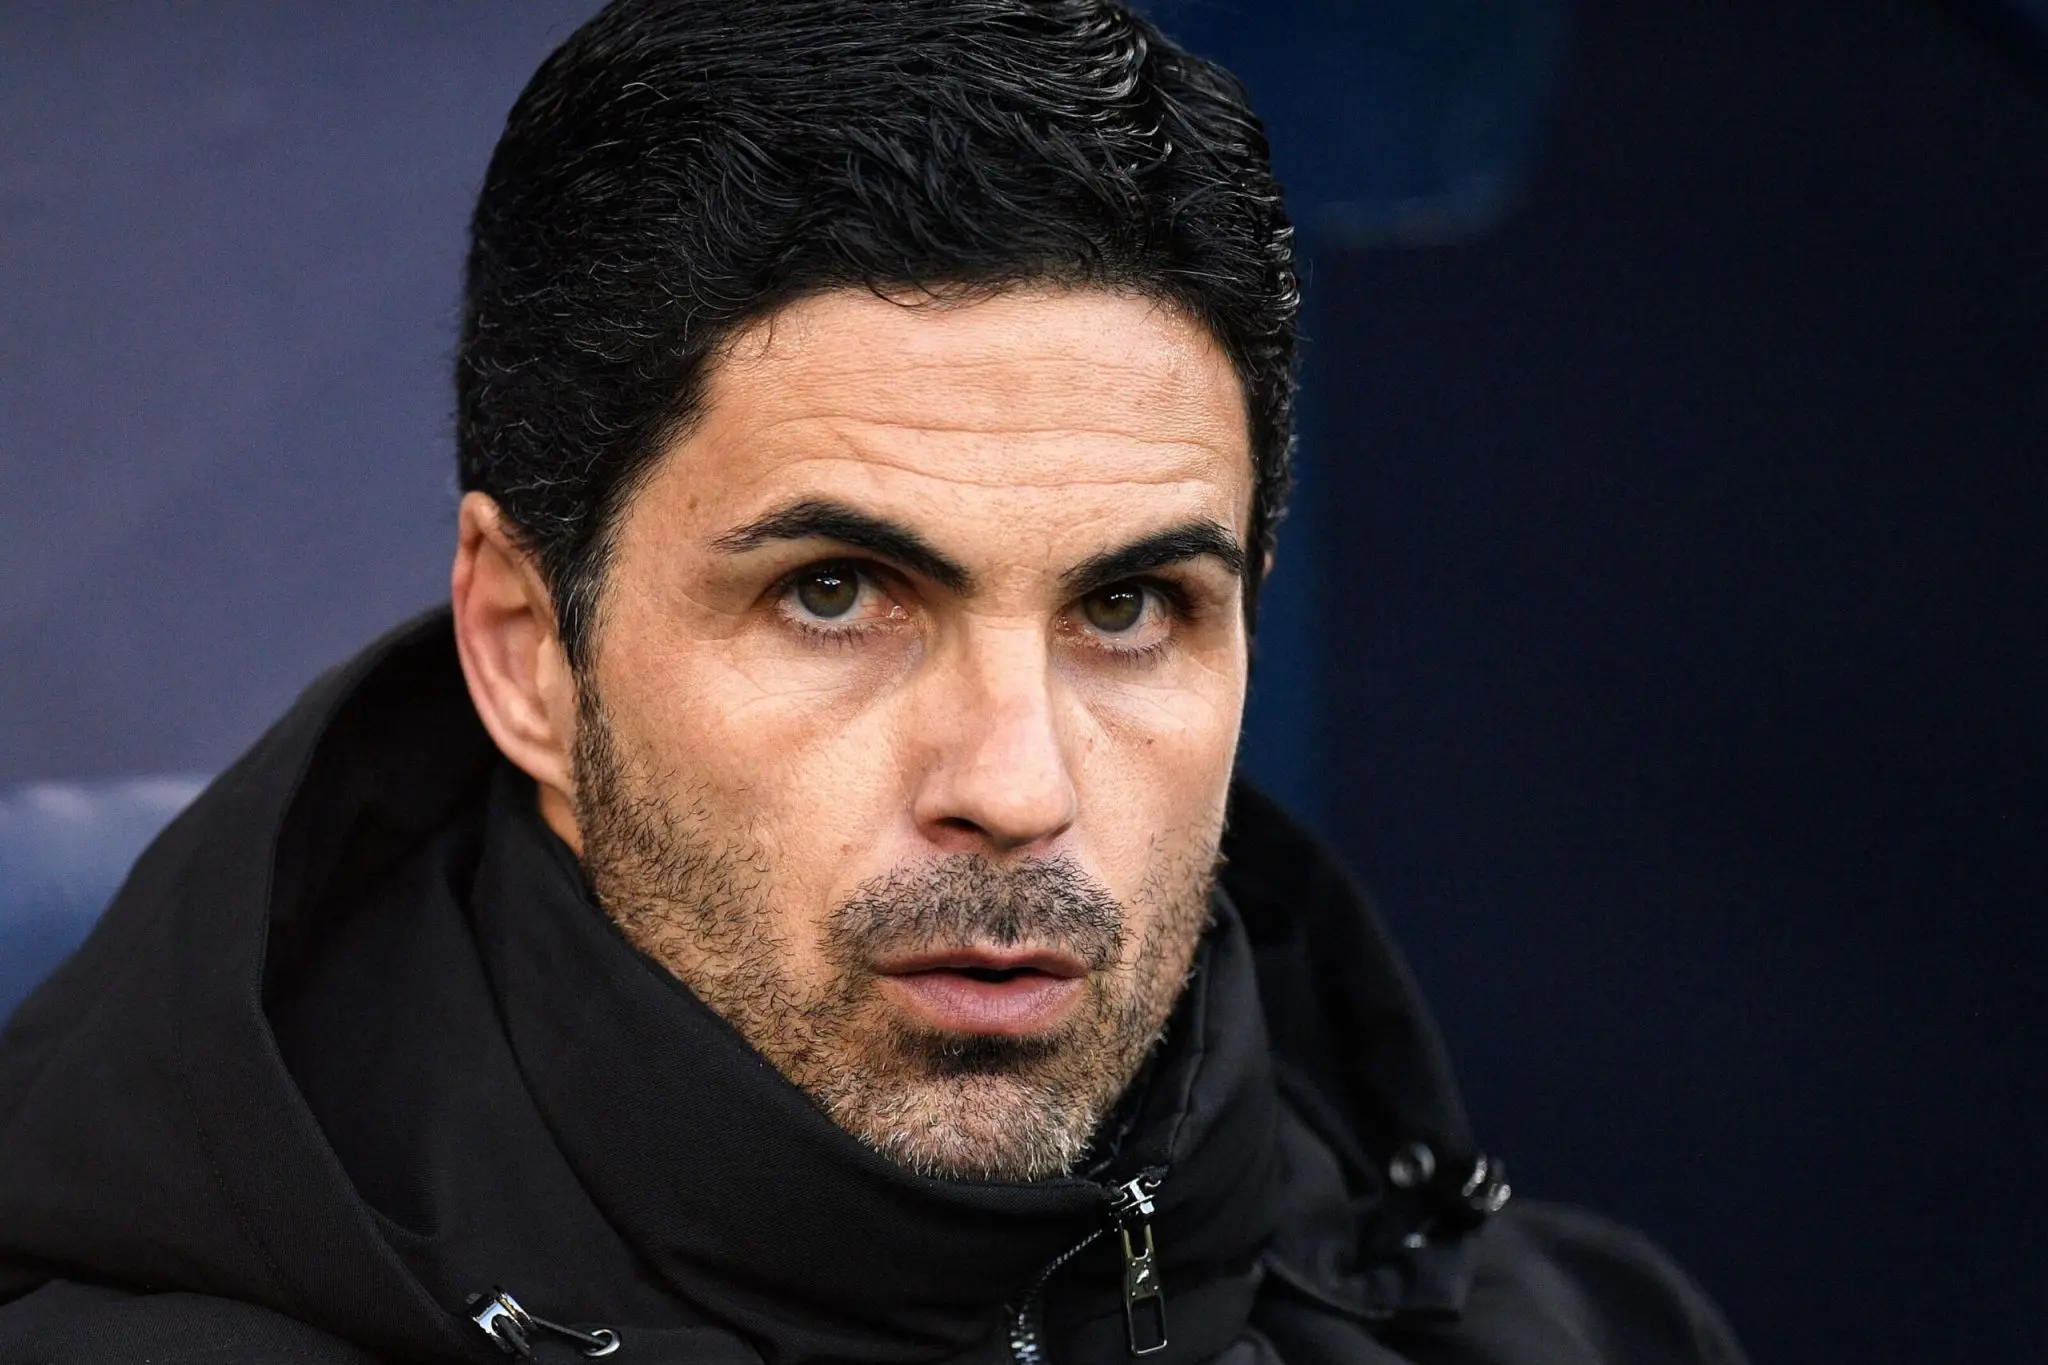 EPL: ‘He’s really trying’ – Arteta defends struggling Arsenal star